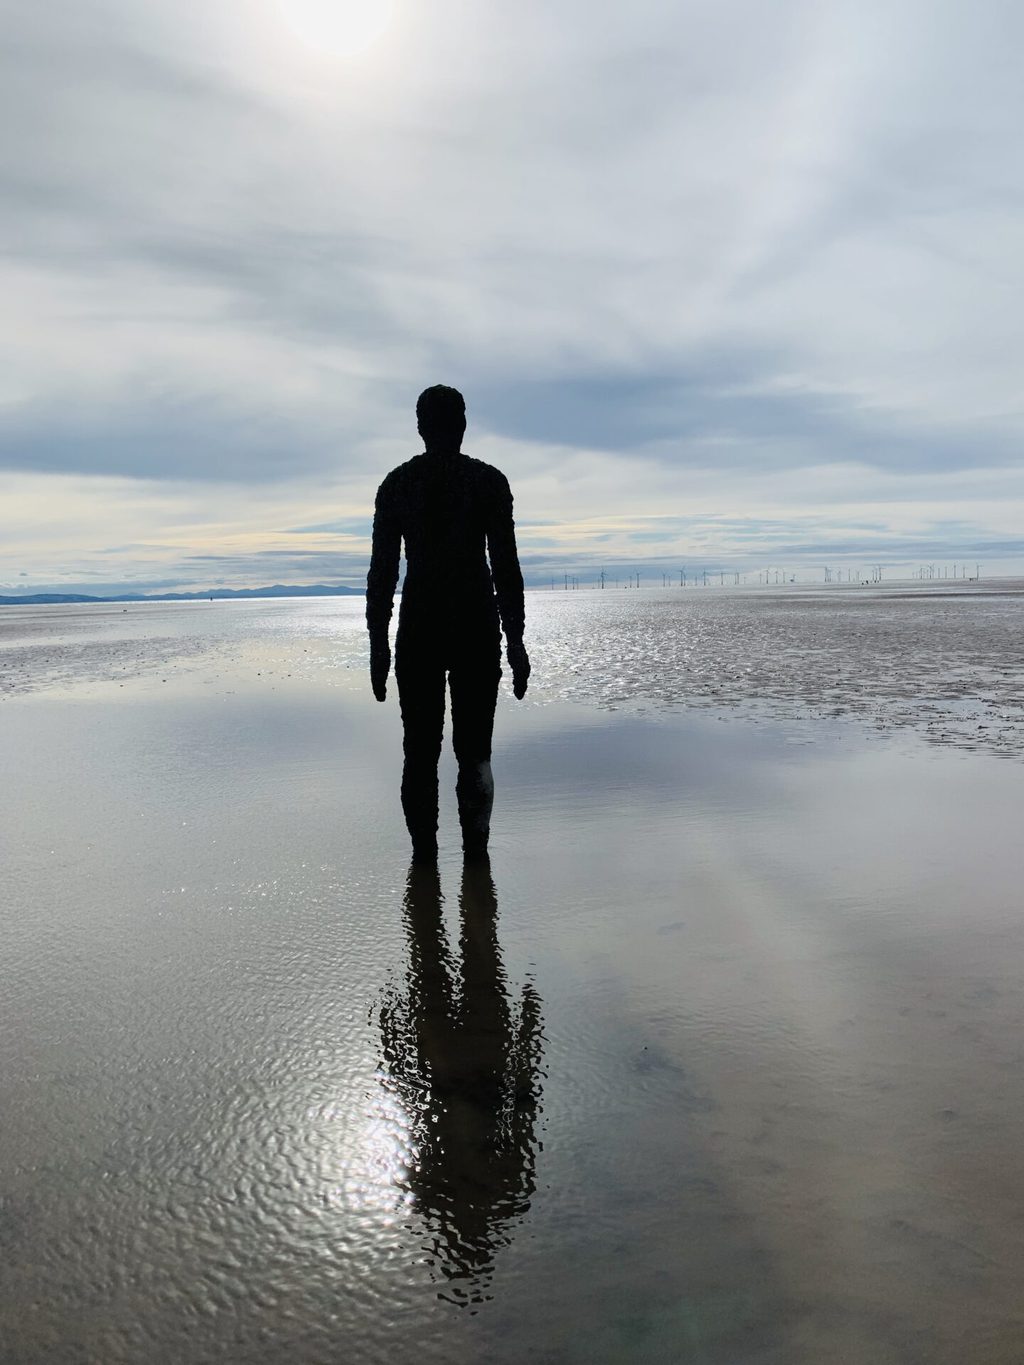 Visiting the Antony Gormley Statues in Liverpool | Another Place, Crosby